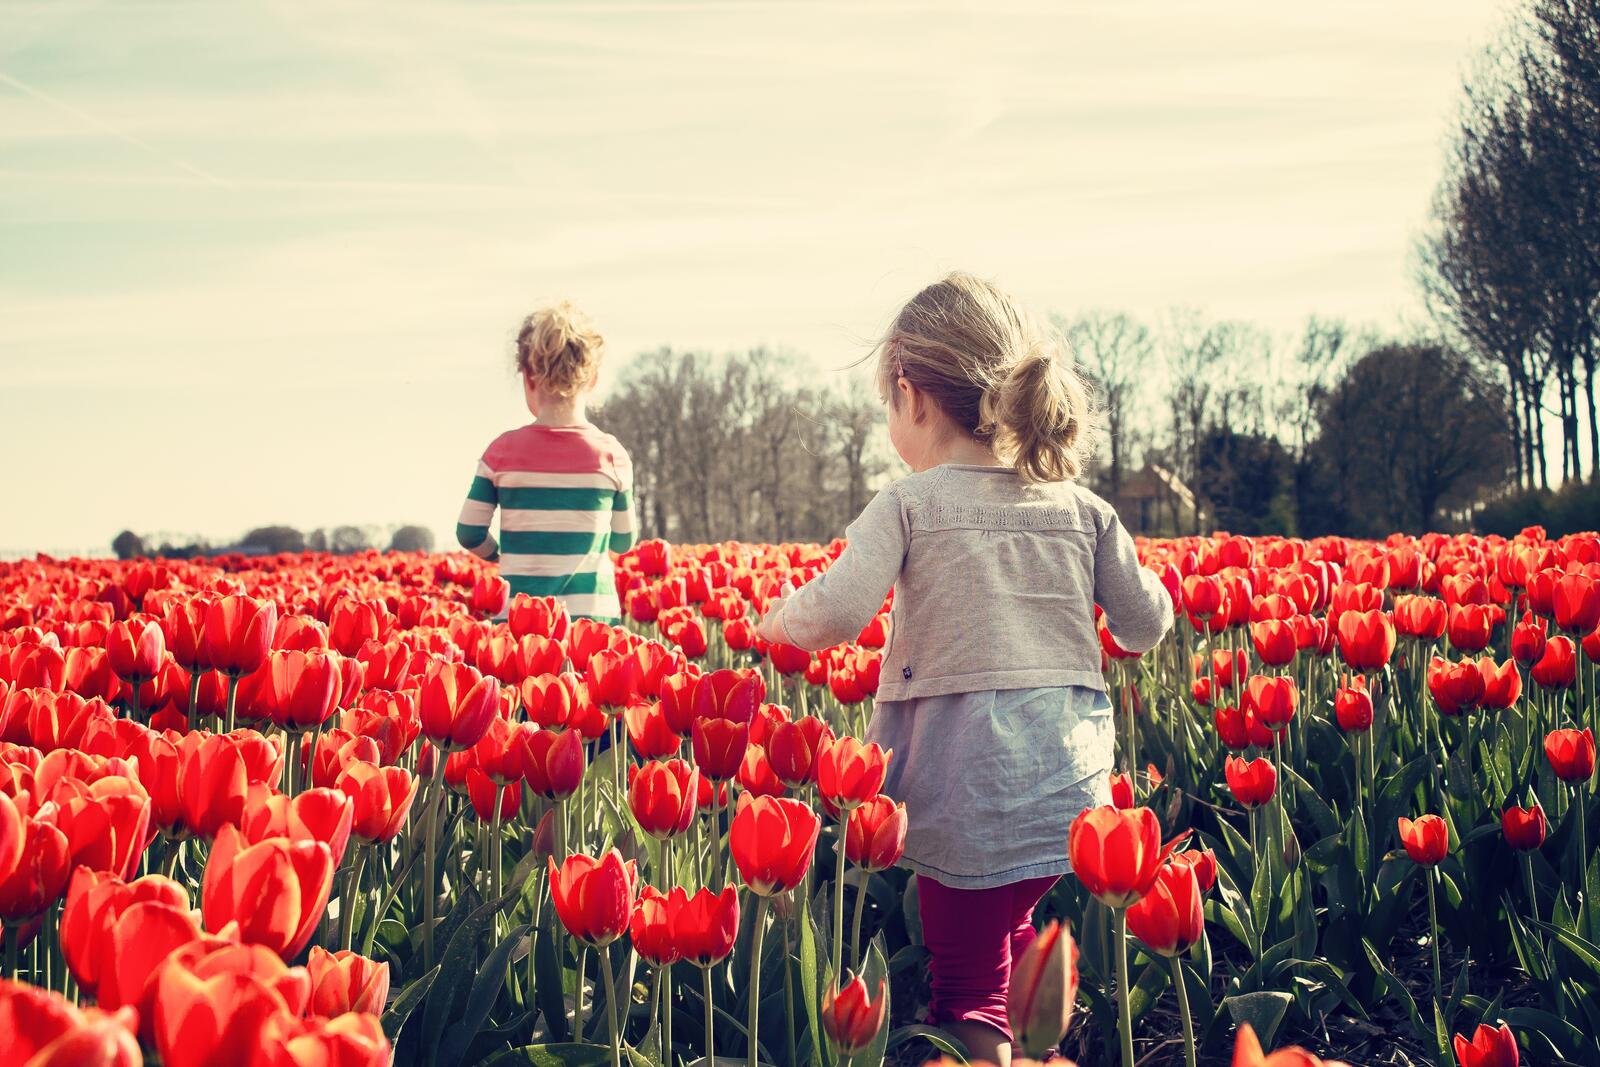 Free photo Children walking through a field of red tulips